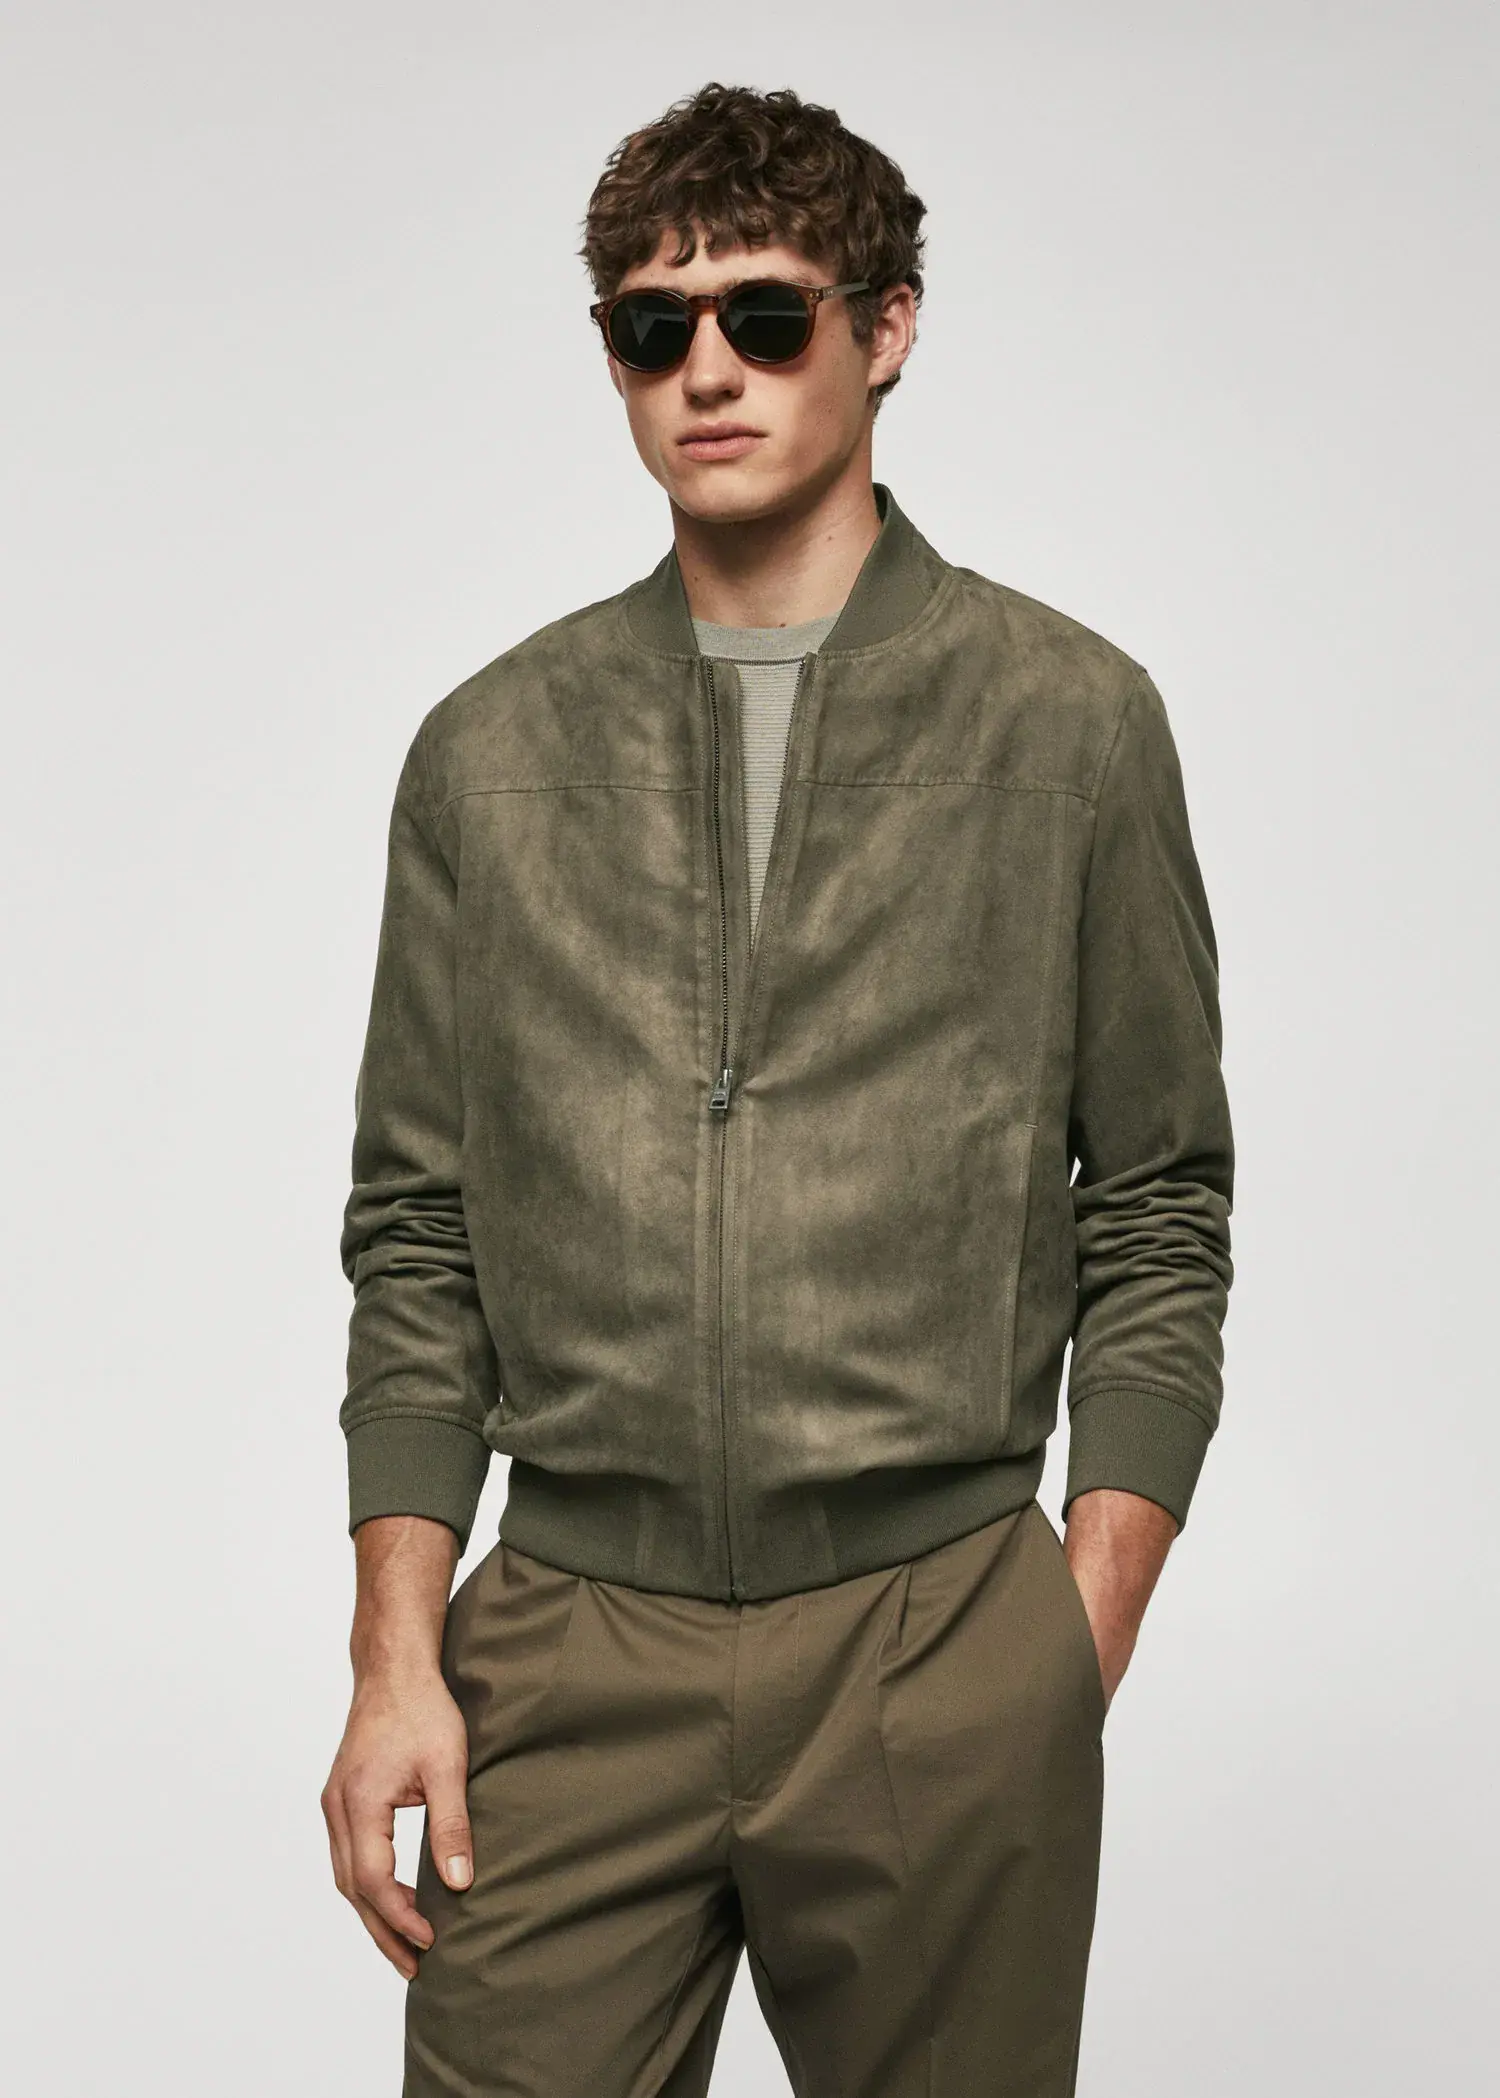 Mango Suede-effect bomber jacket. a man wearing a green jacket and sunglasses. 